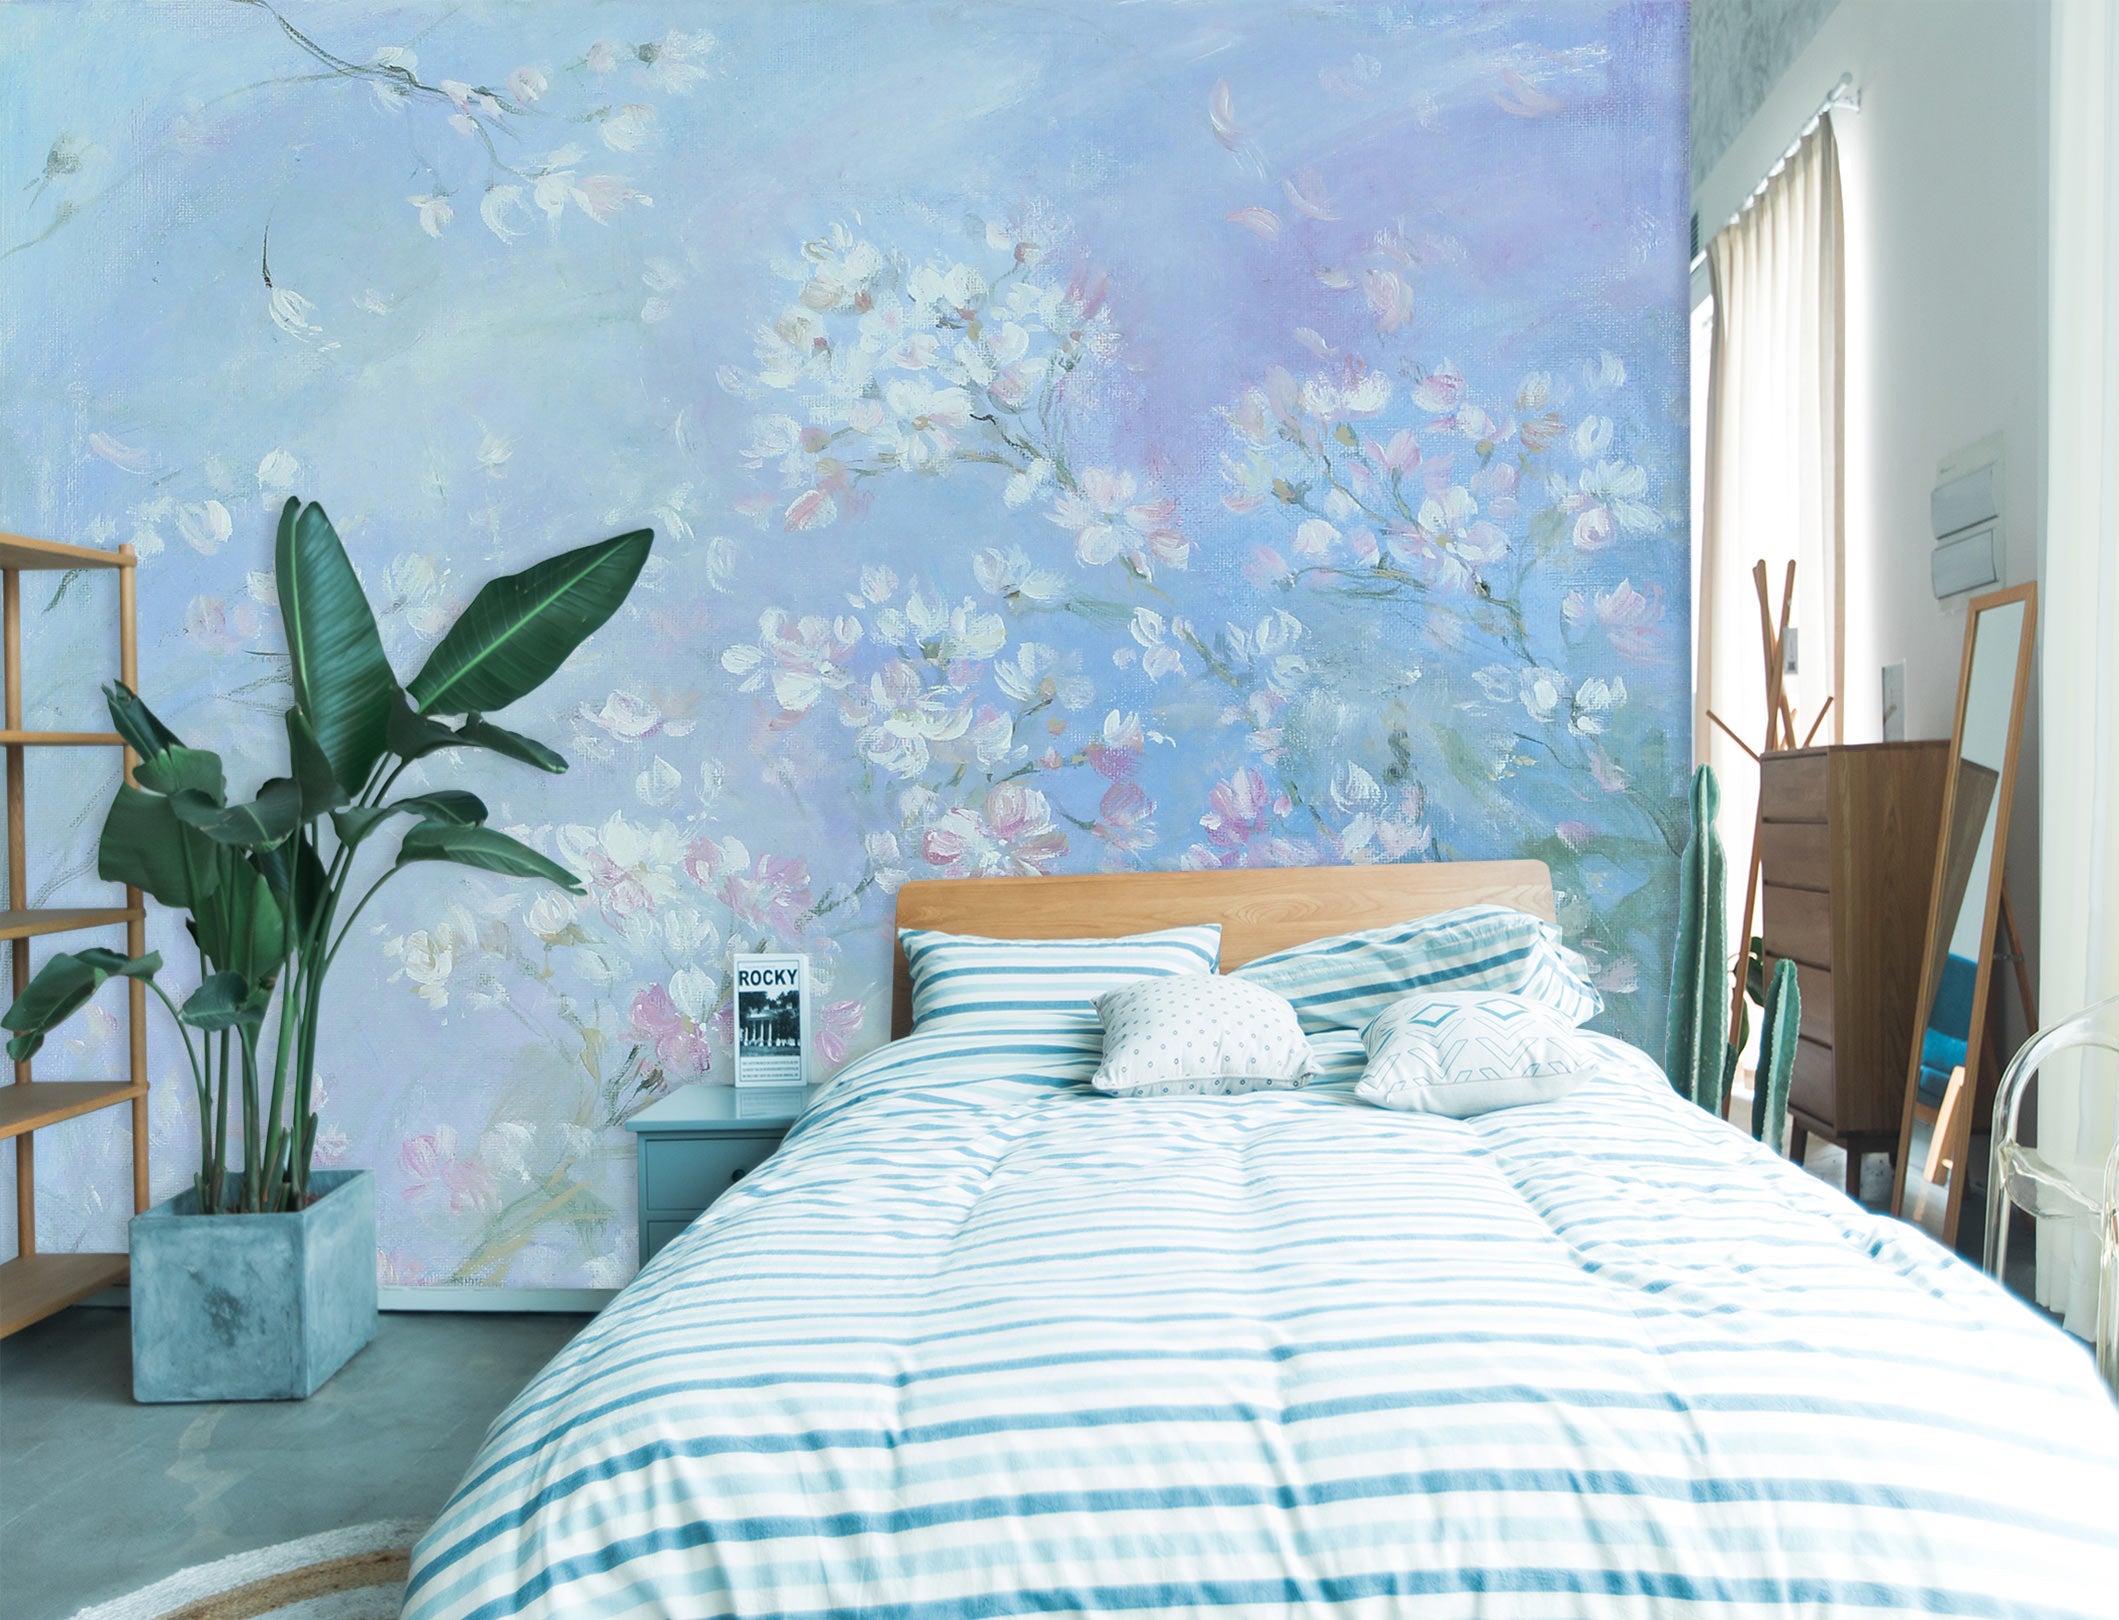 3D White Floral 3183 Debi Coules Wall Mural Wall Murals